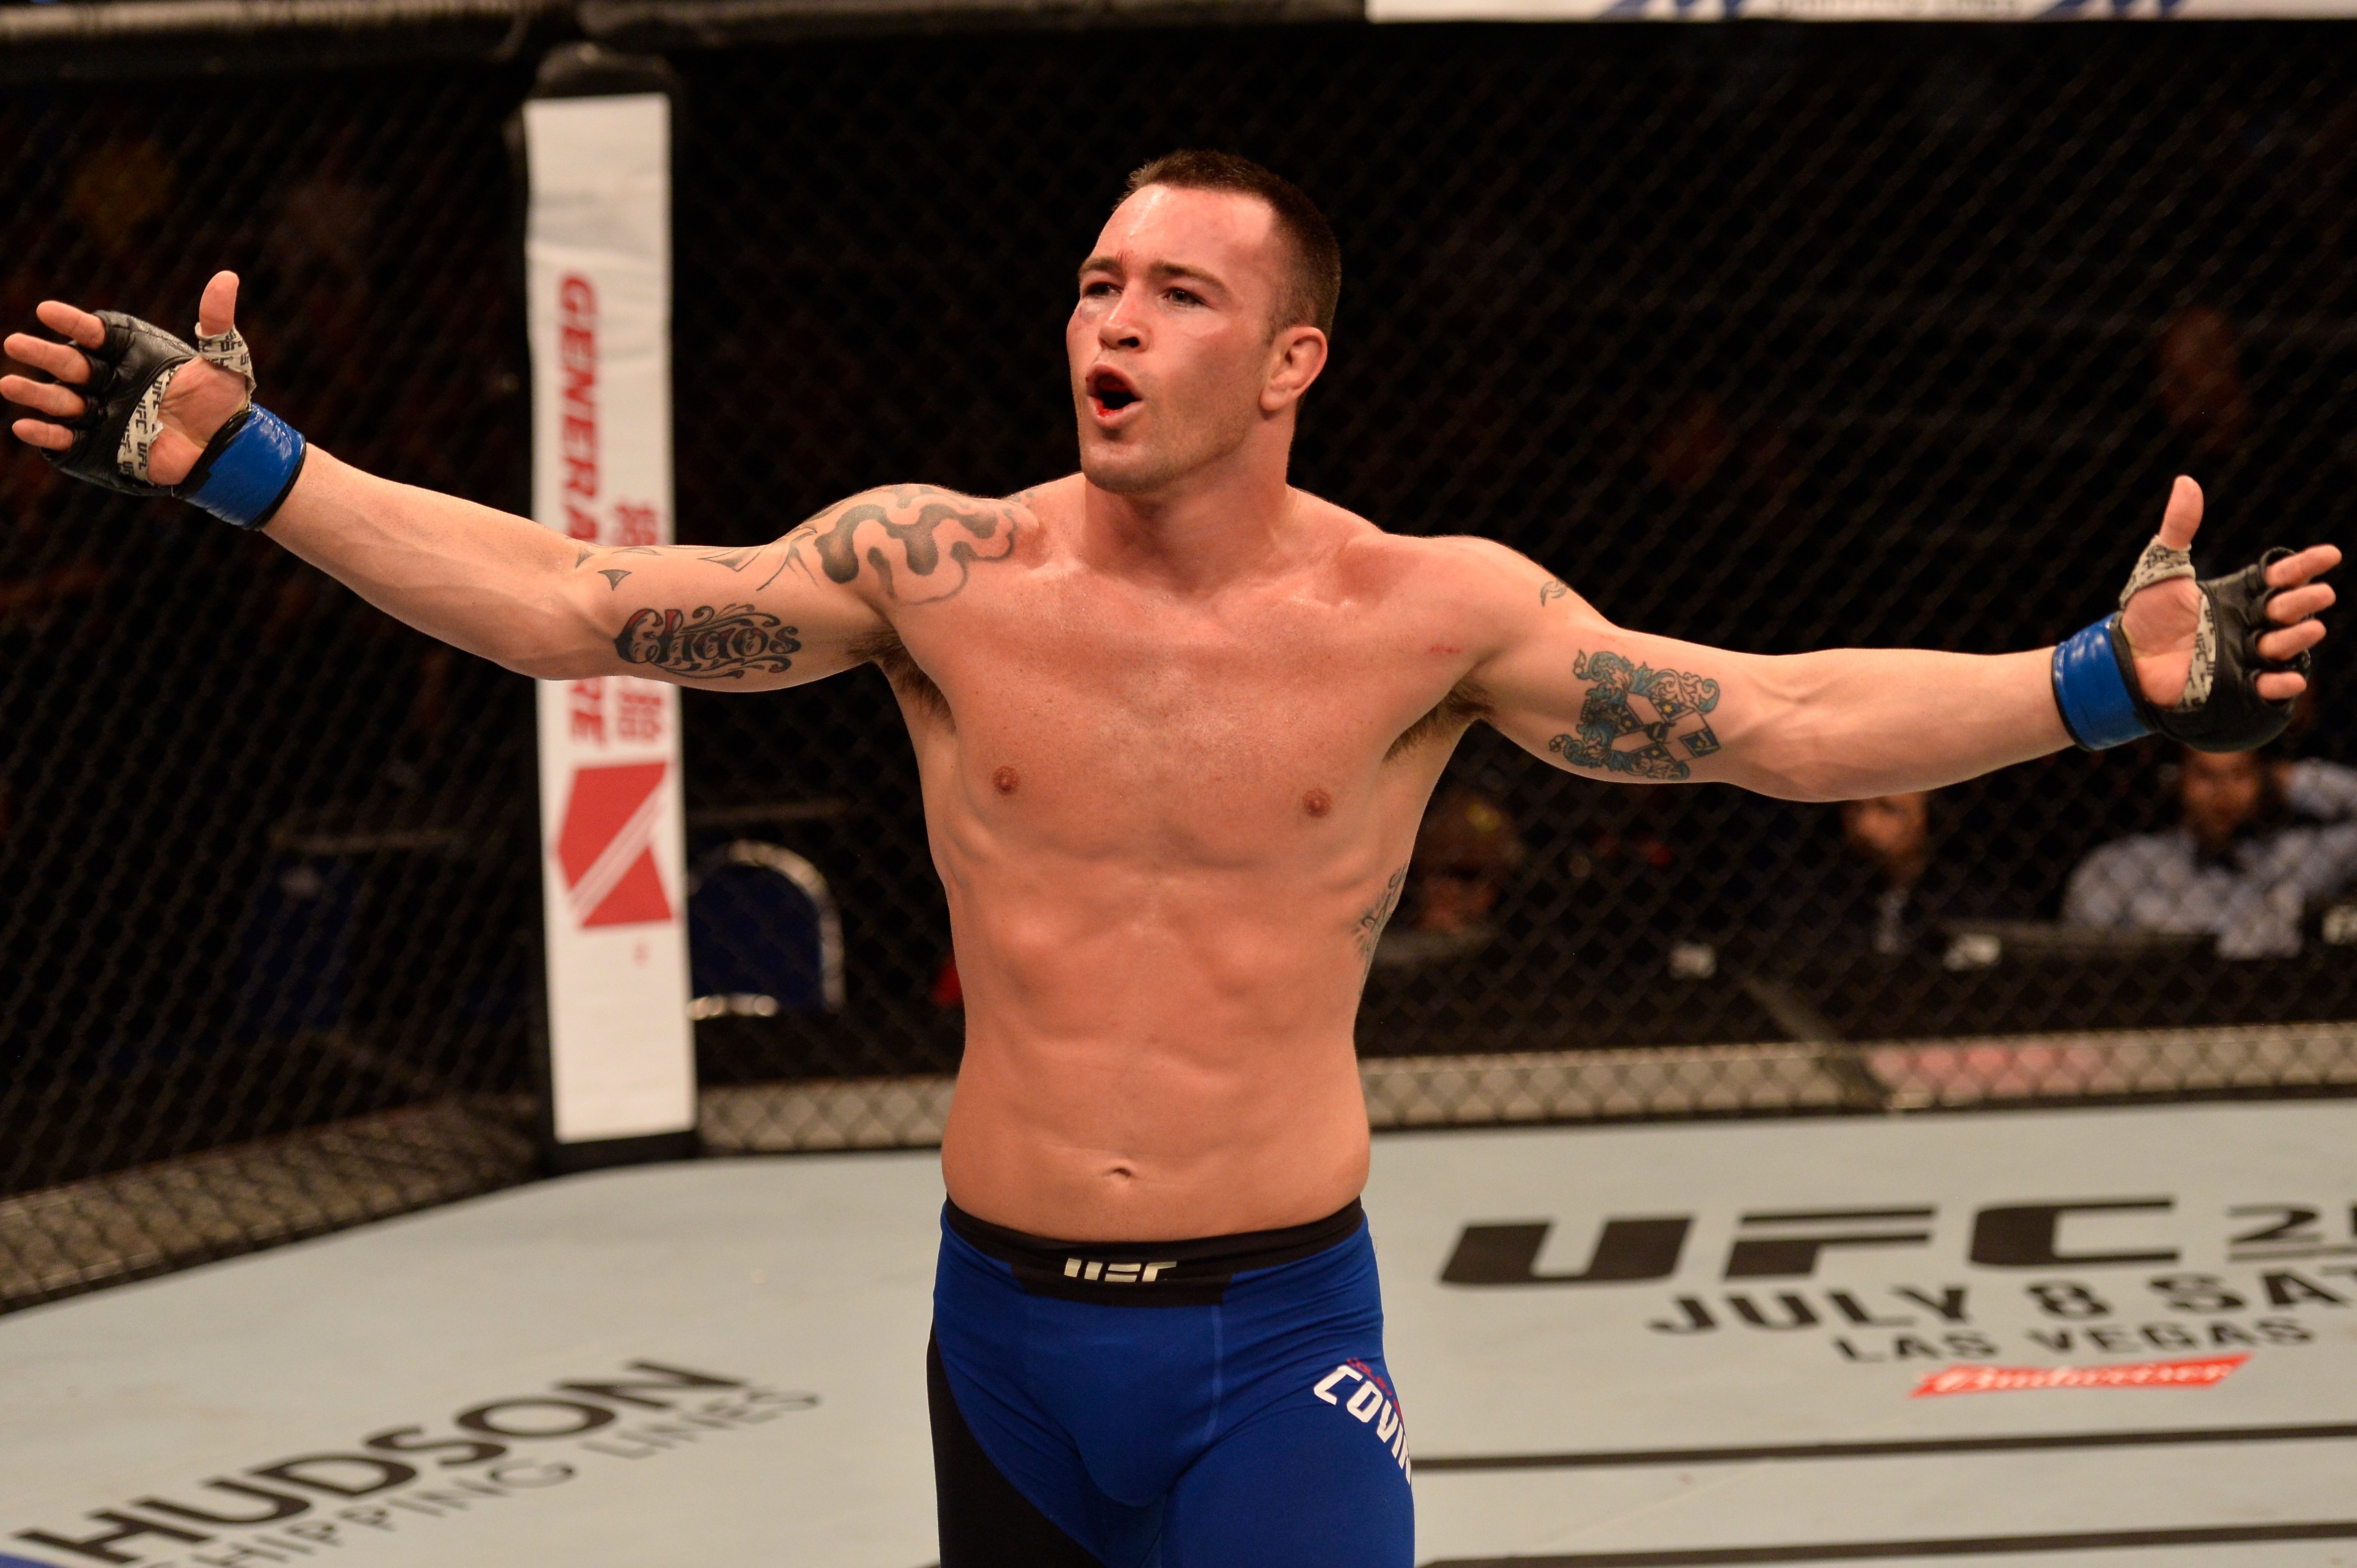 UFC Fighter Colby Covington Talks About His Love Of Pro Wrestling, His GFW Run & More! (Video)